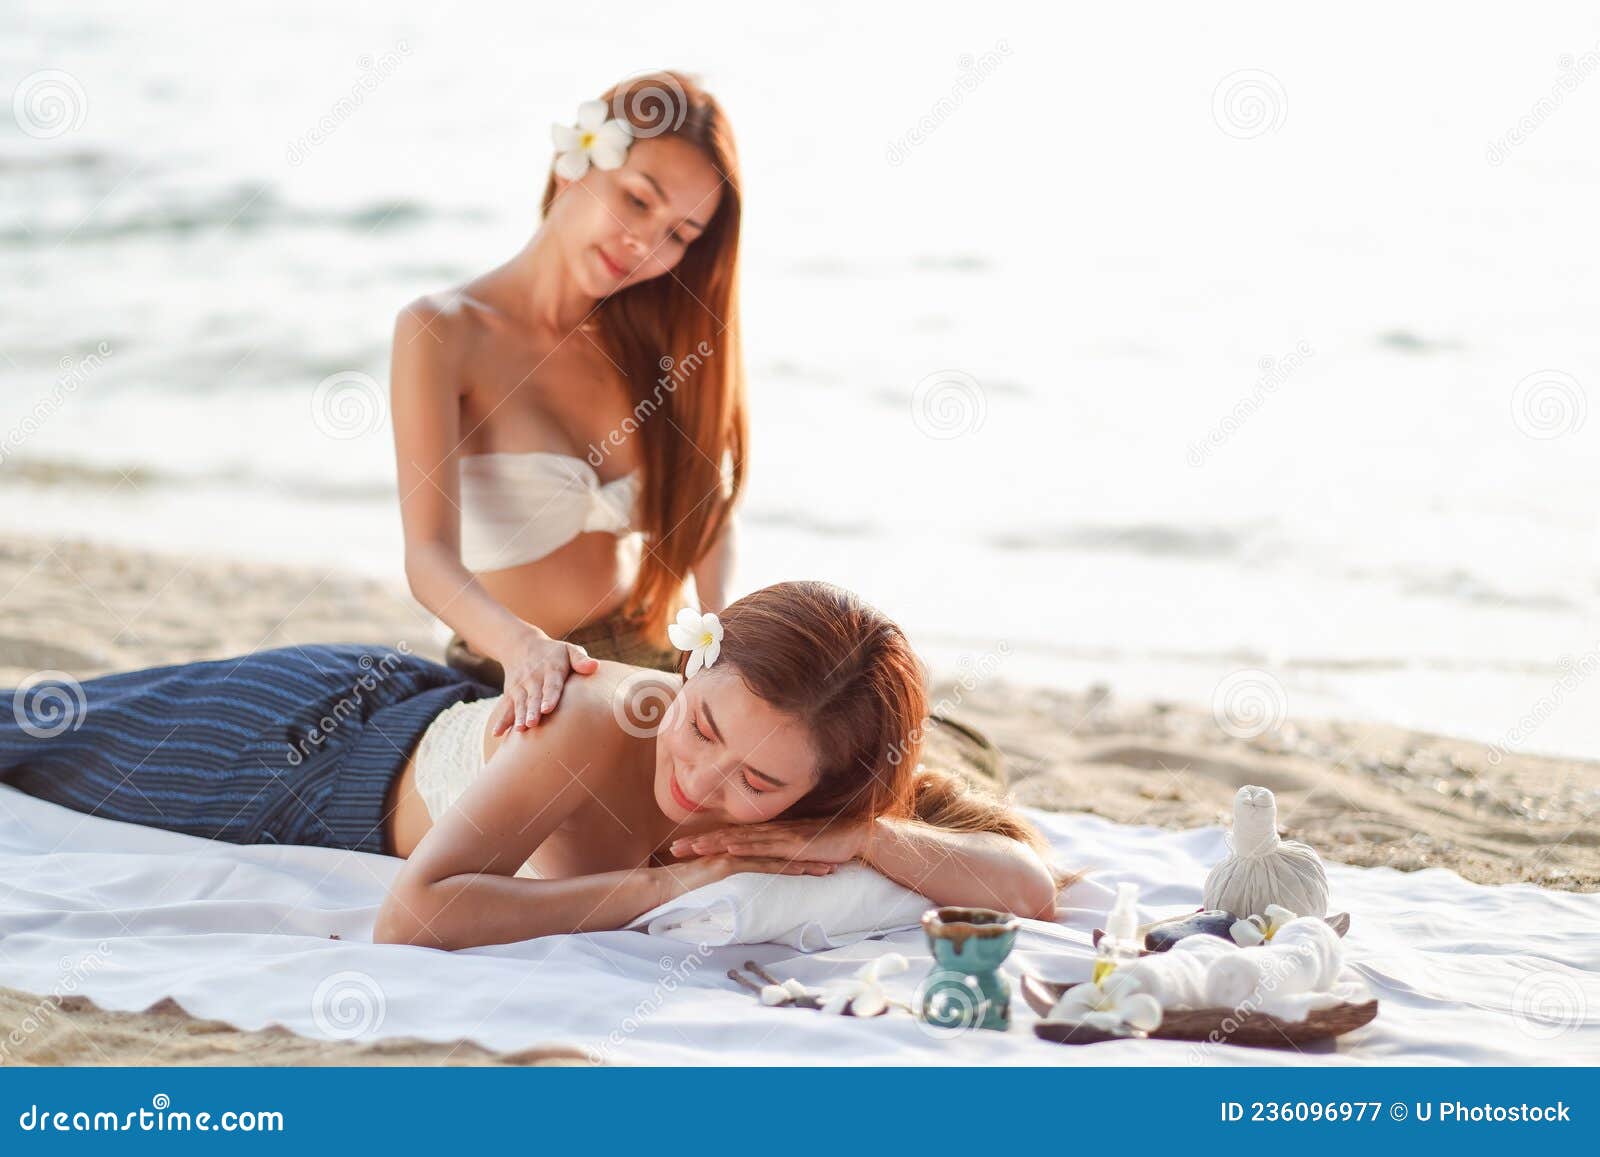 Two Asia Women Doing Spa Massage Together On The Beach Stock Image Image Of Beautiful Calm